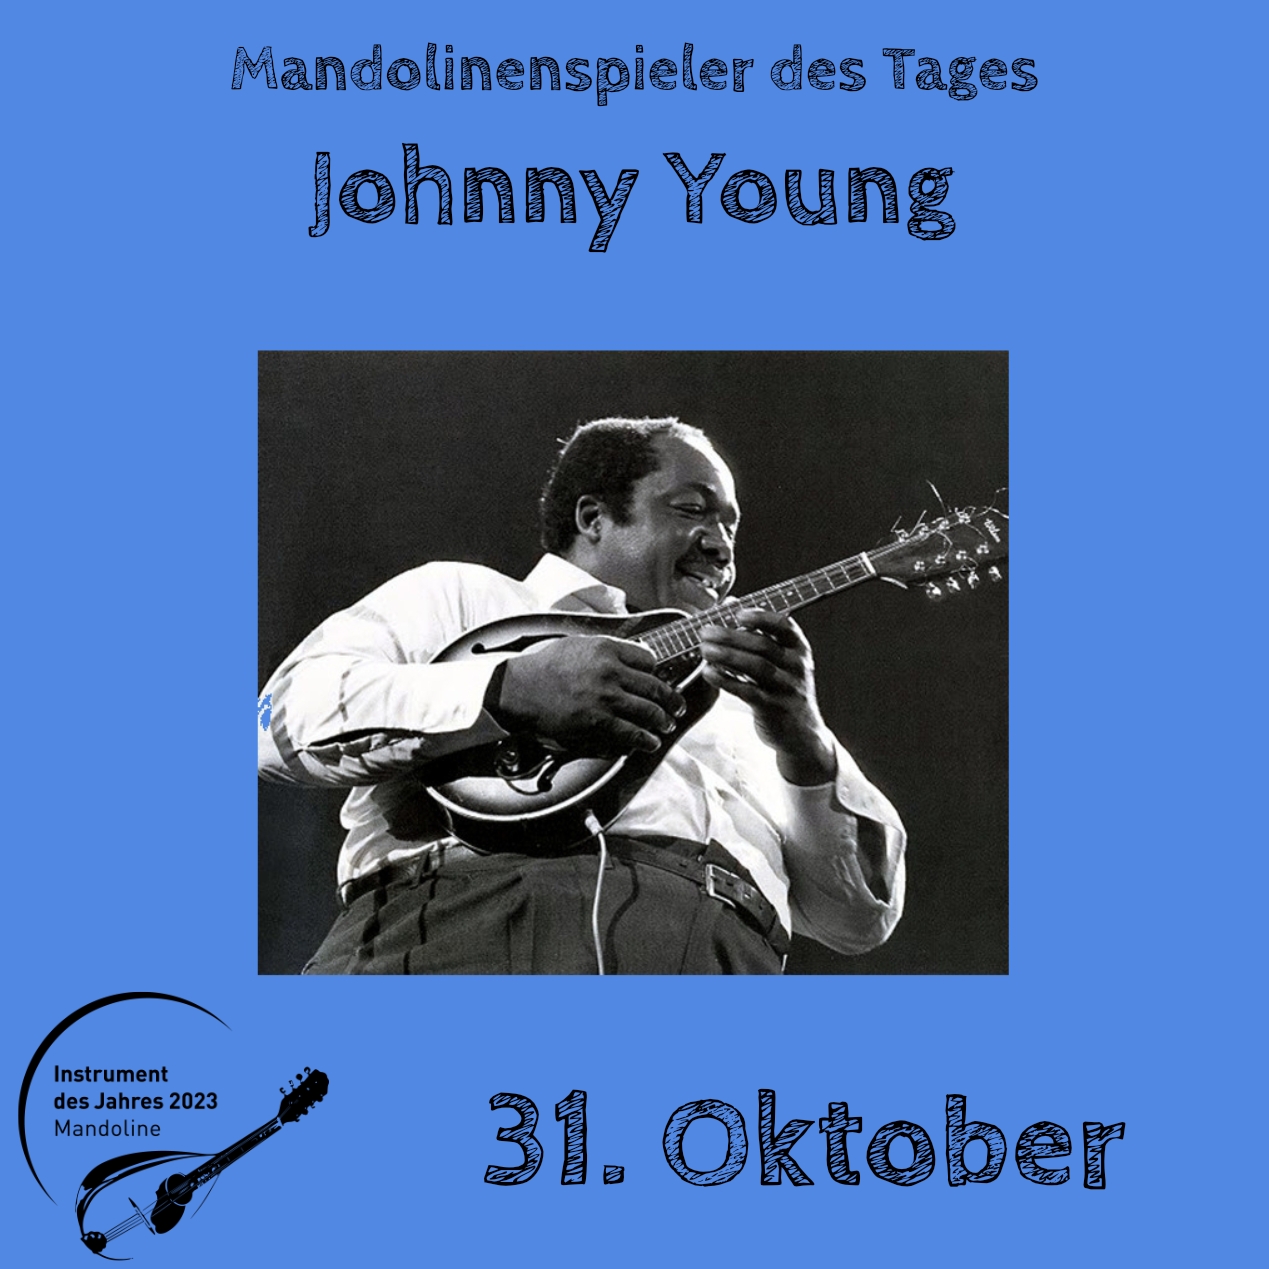 You are currently viewing 31. Oktober – Johnny Young